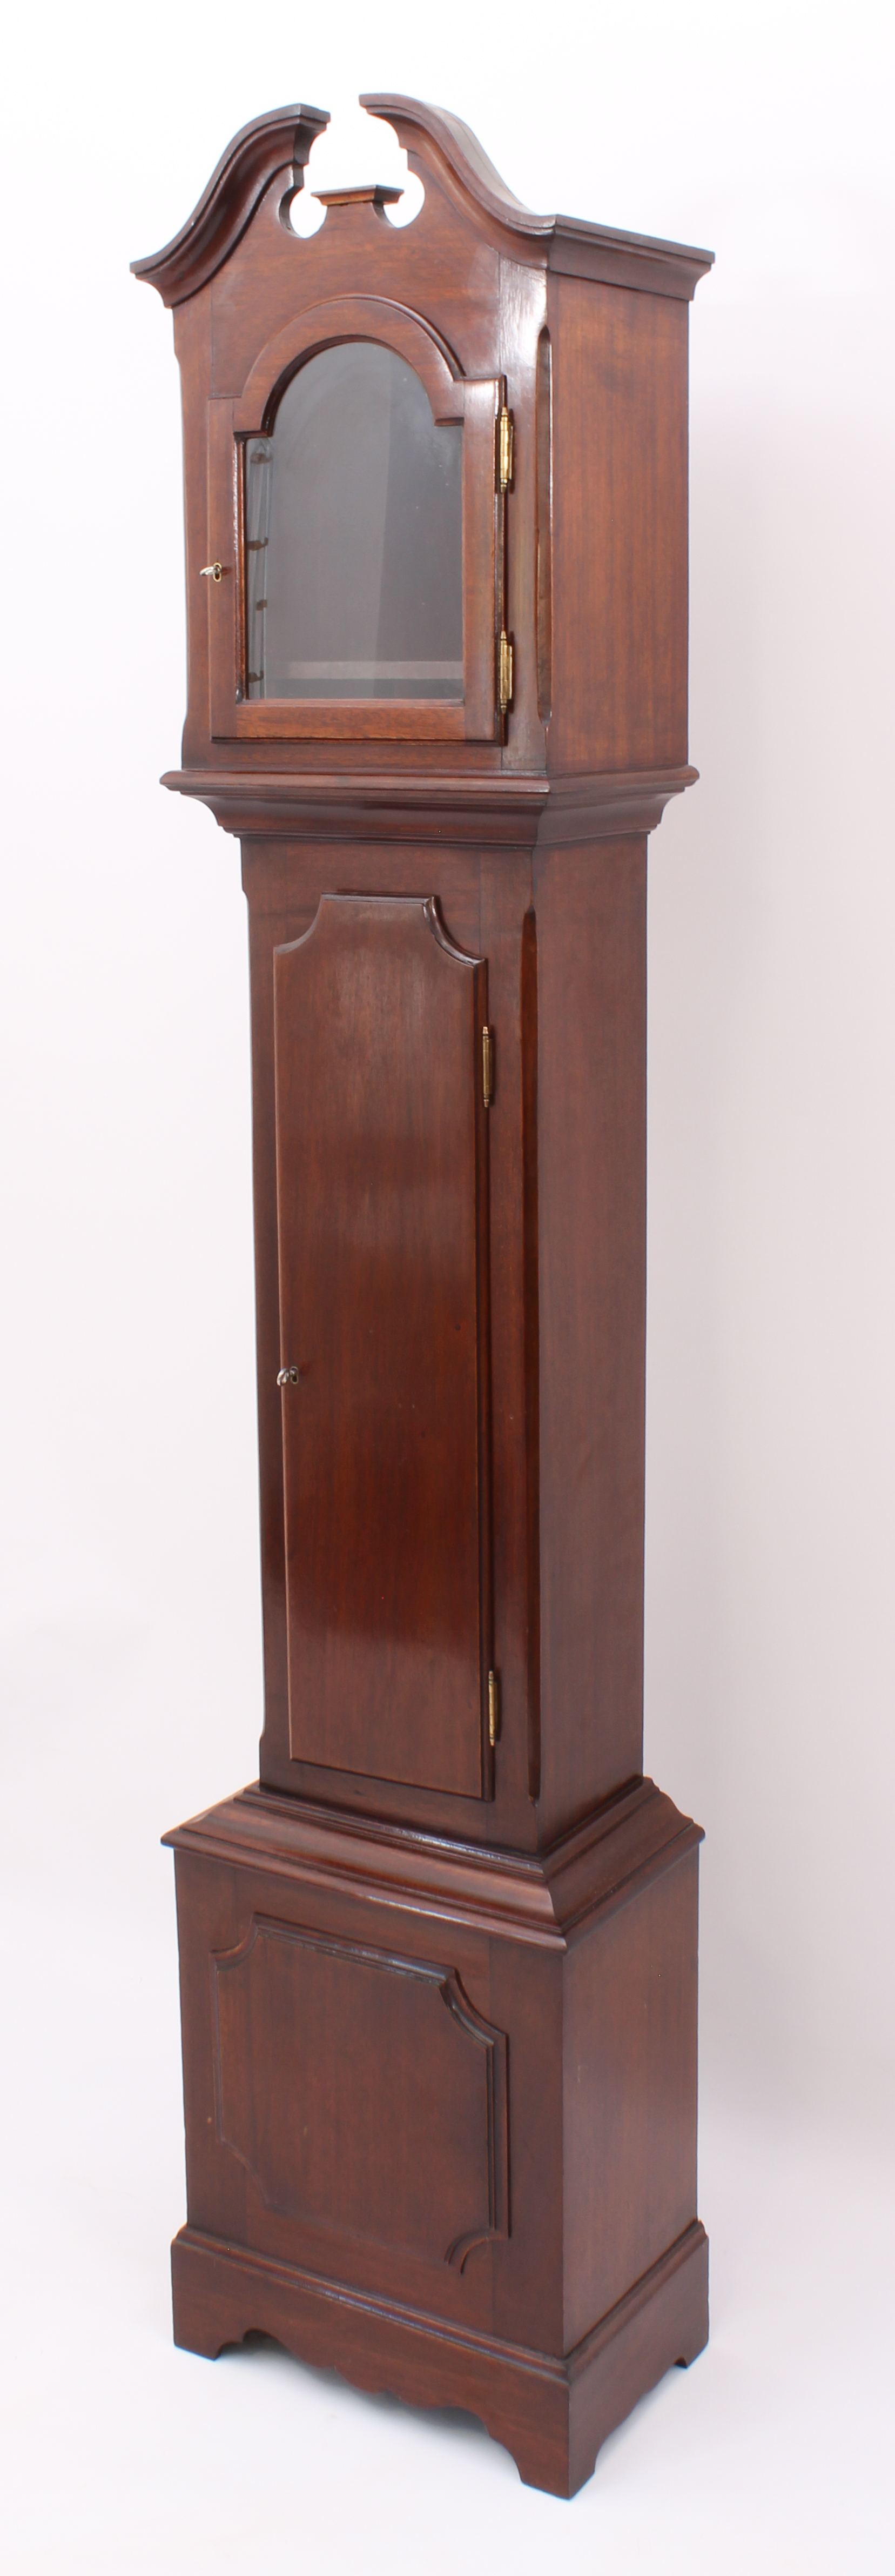 A mahogany longcase clock-case of small proportions - early 20th century, 179.25 cm high, 37.5 cm - Image 2 of 2